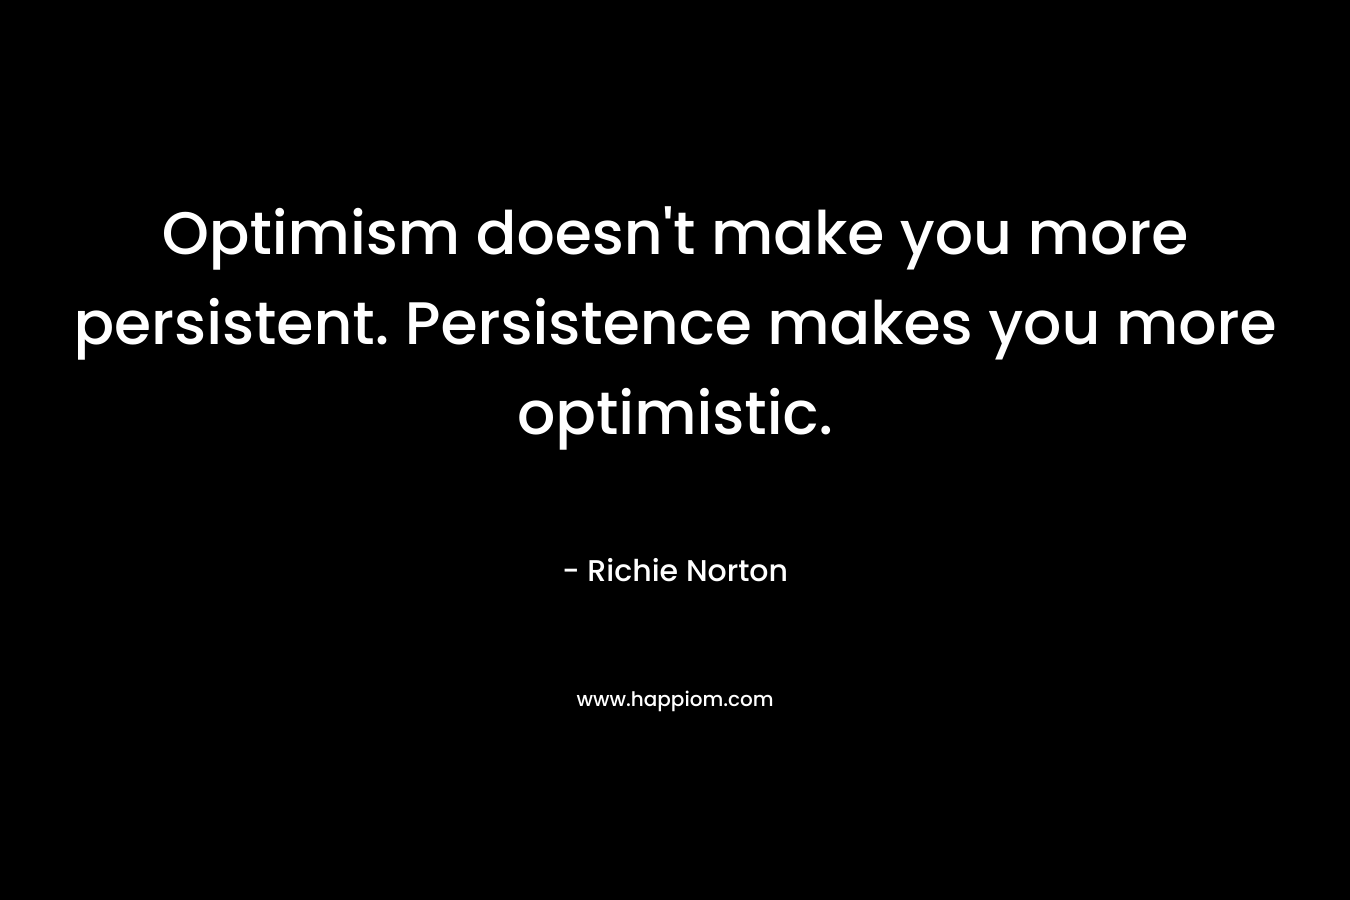 Optimism doesn't make you more persistent. Persistence makes you more optimistic.